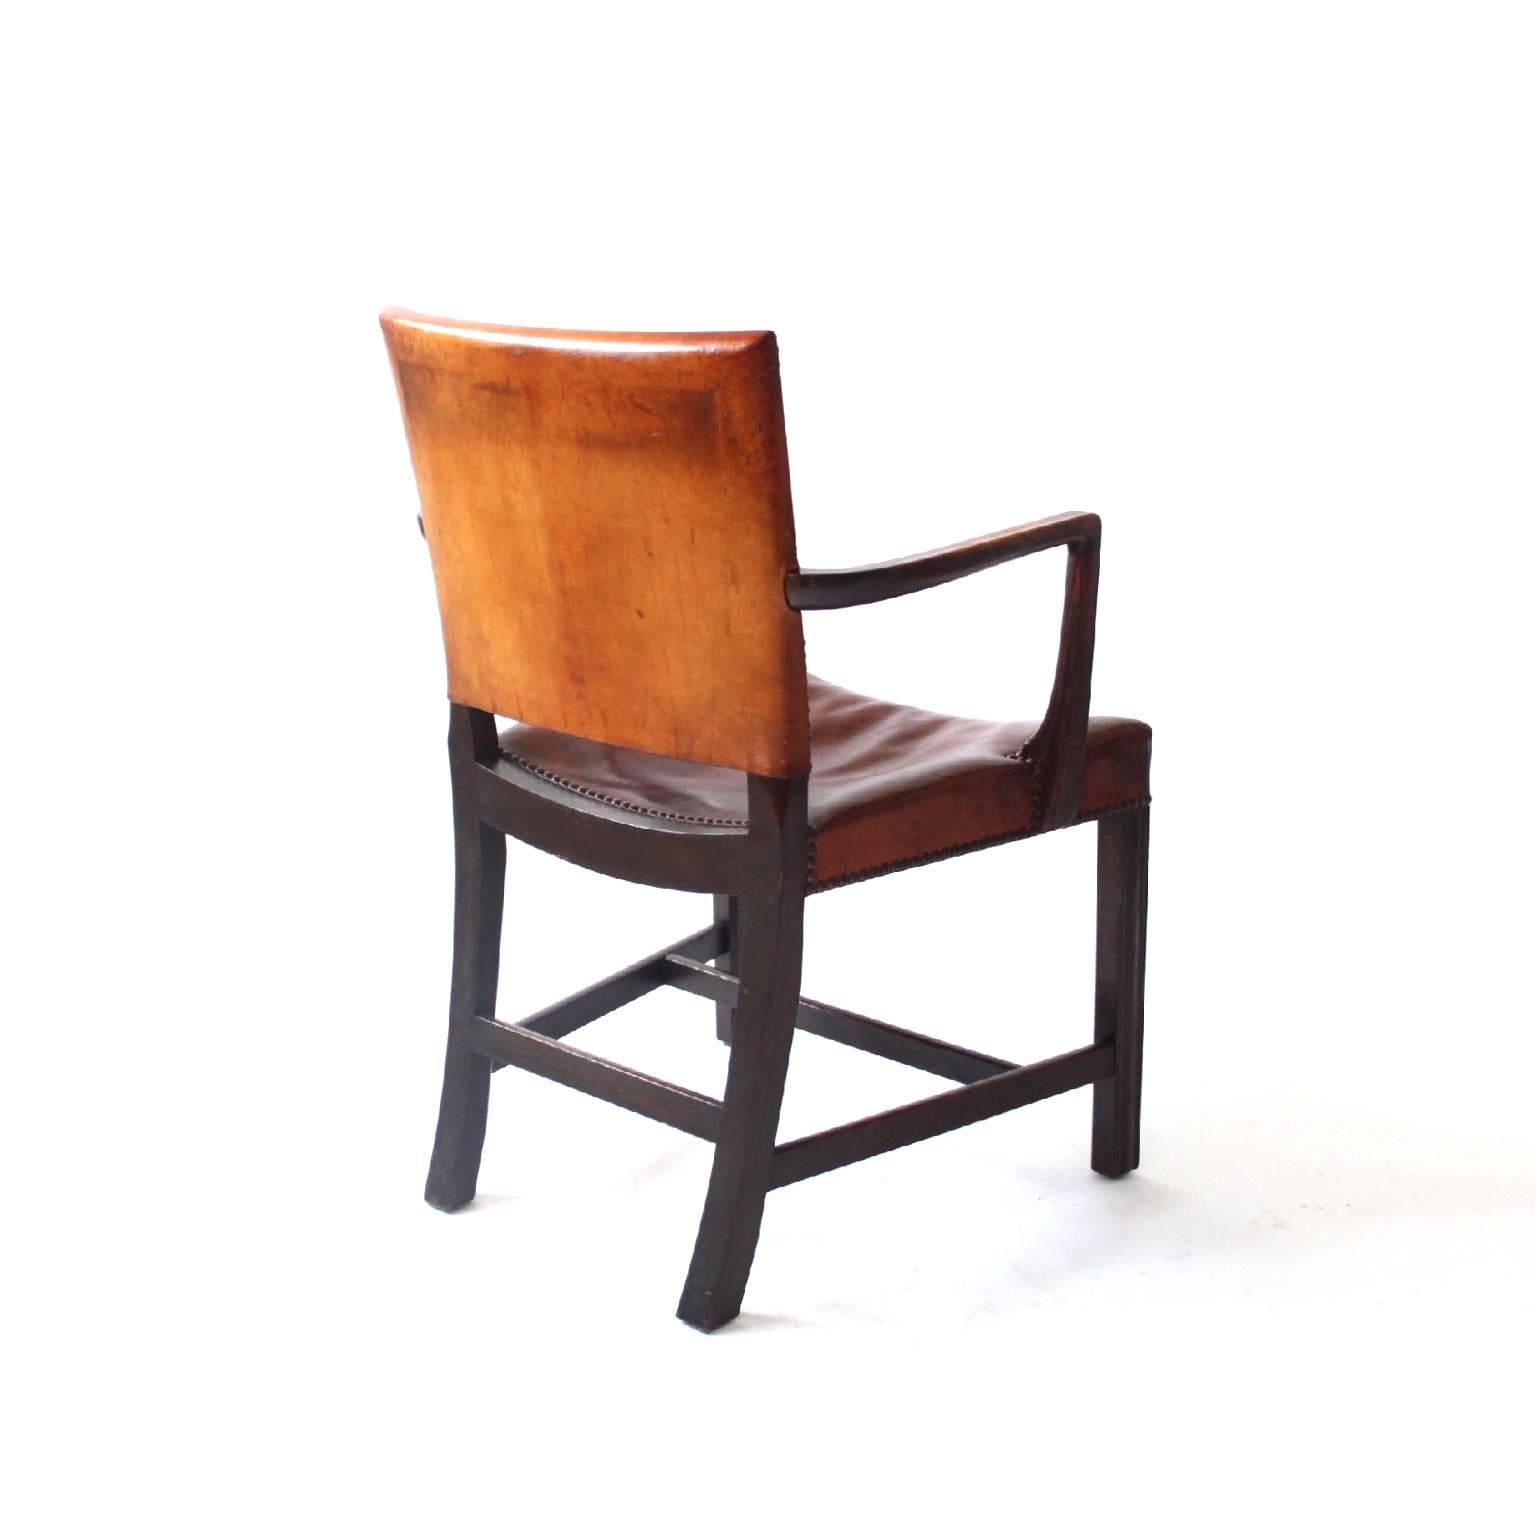 20th Century Kaare Klint Armchair Dark Stained Oak and Original Patinated Niger Leather 1930s For Sale